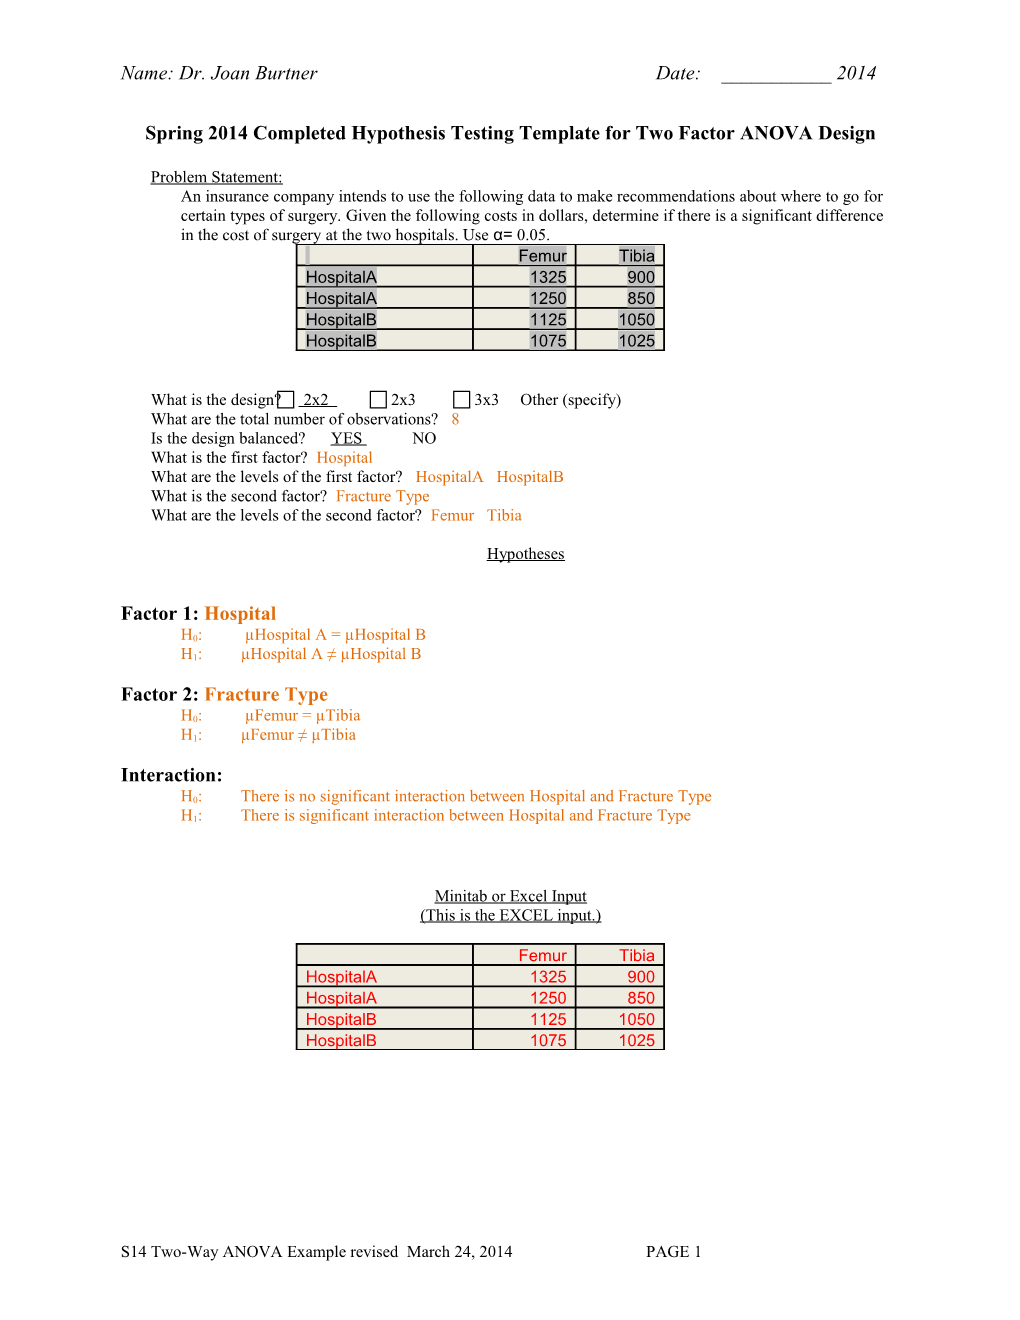 Spring 2014Completed Hypothesis Testing Template for Two Factor ANOVA Design